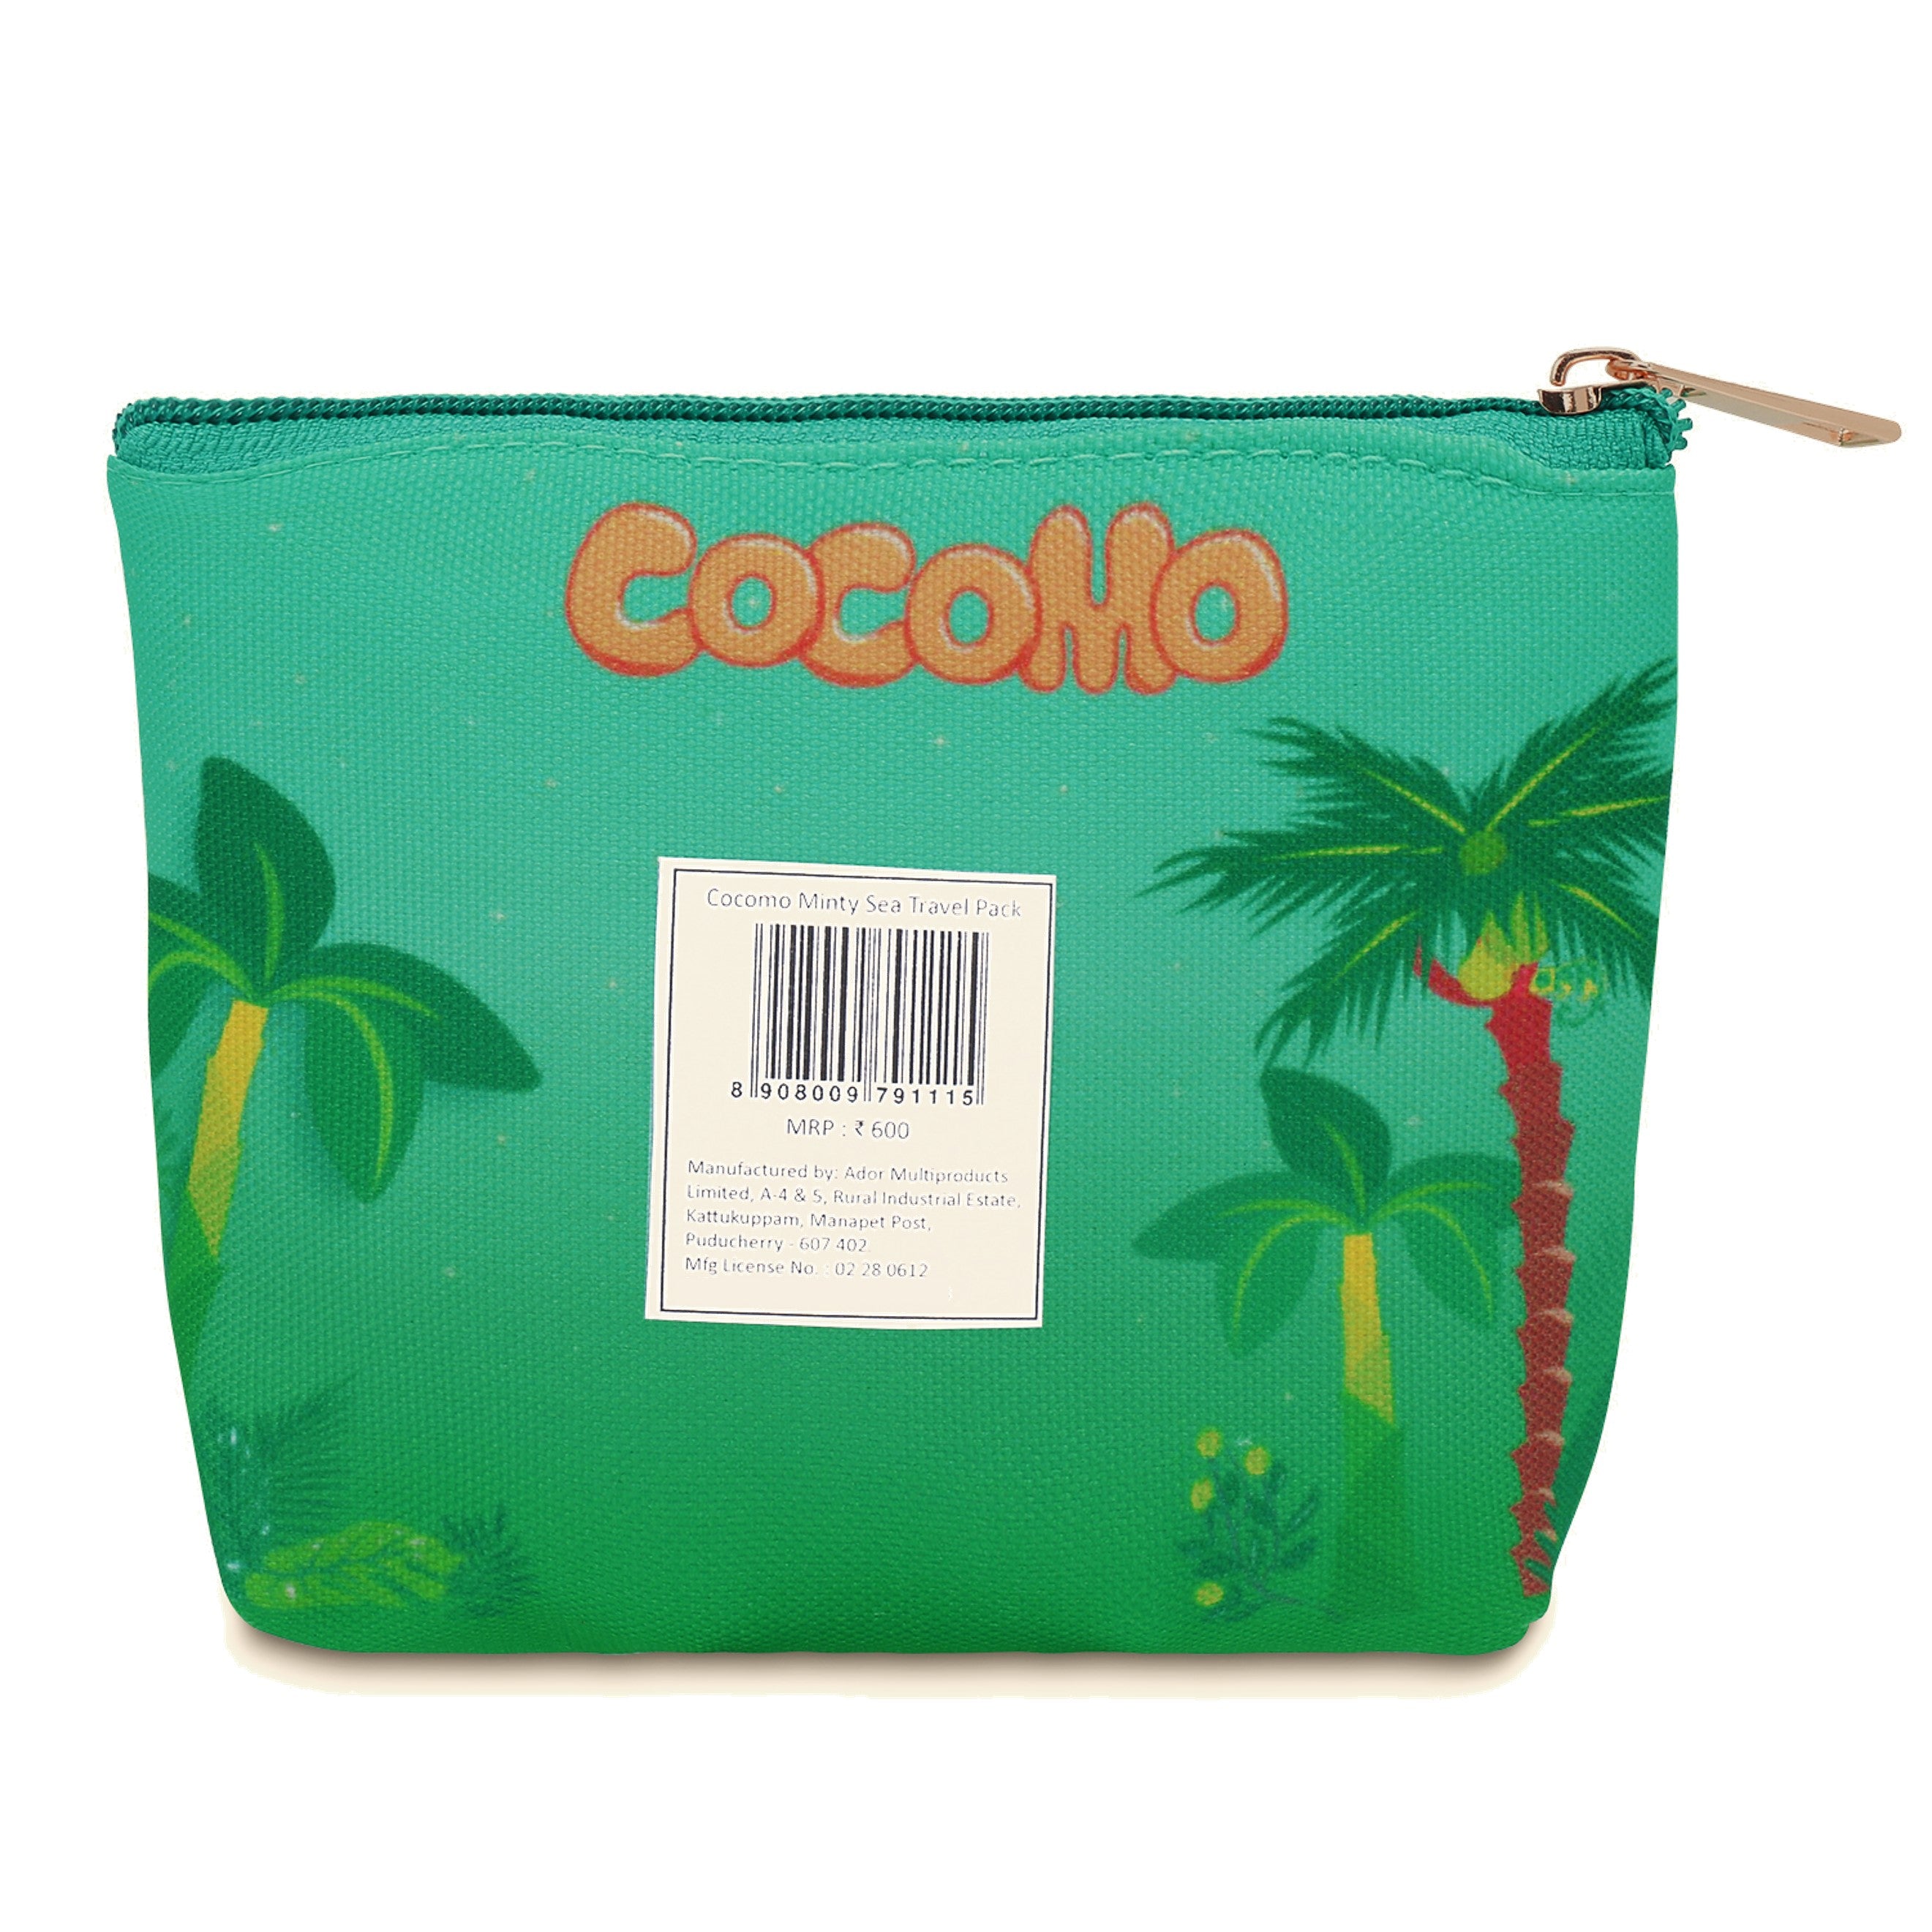 Cocomo Travel & Gift Pack - Minty Sea